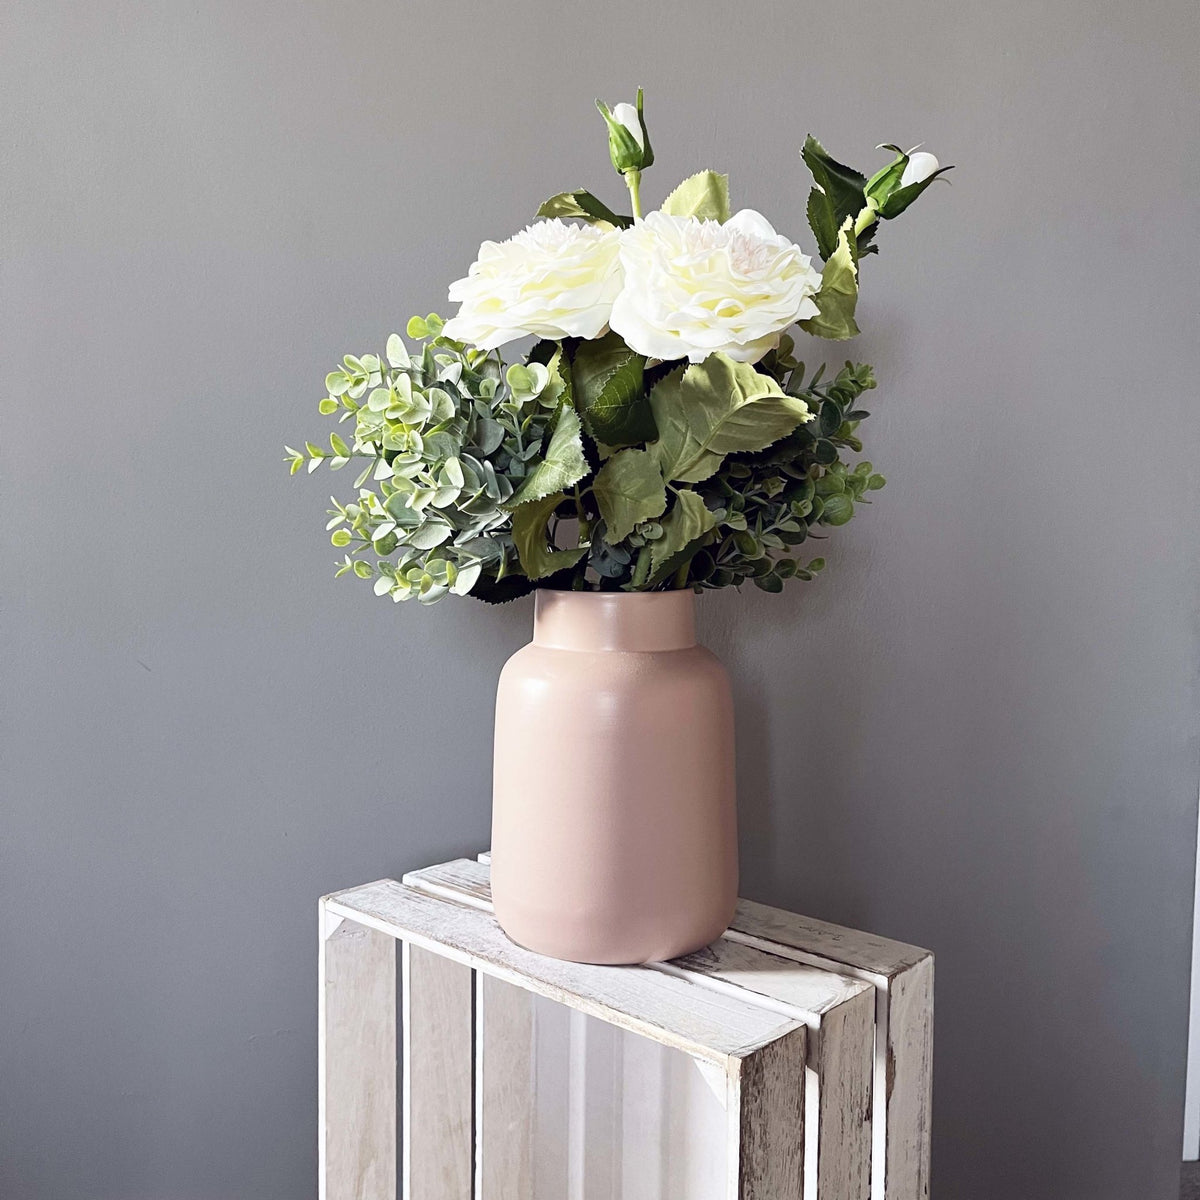 White Garden Rose Spray in a blush pink vase on a crate bench